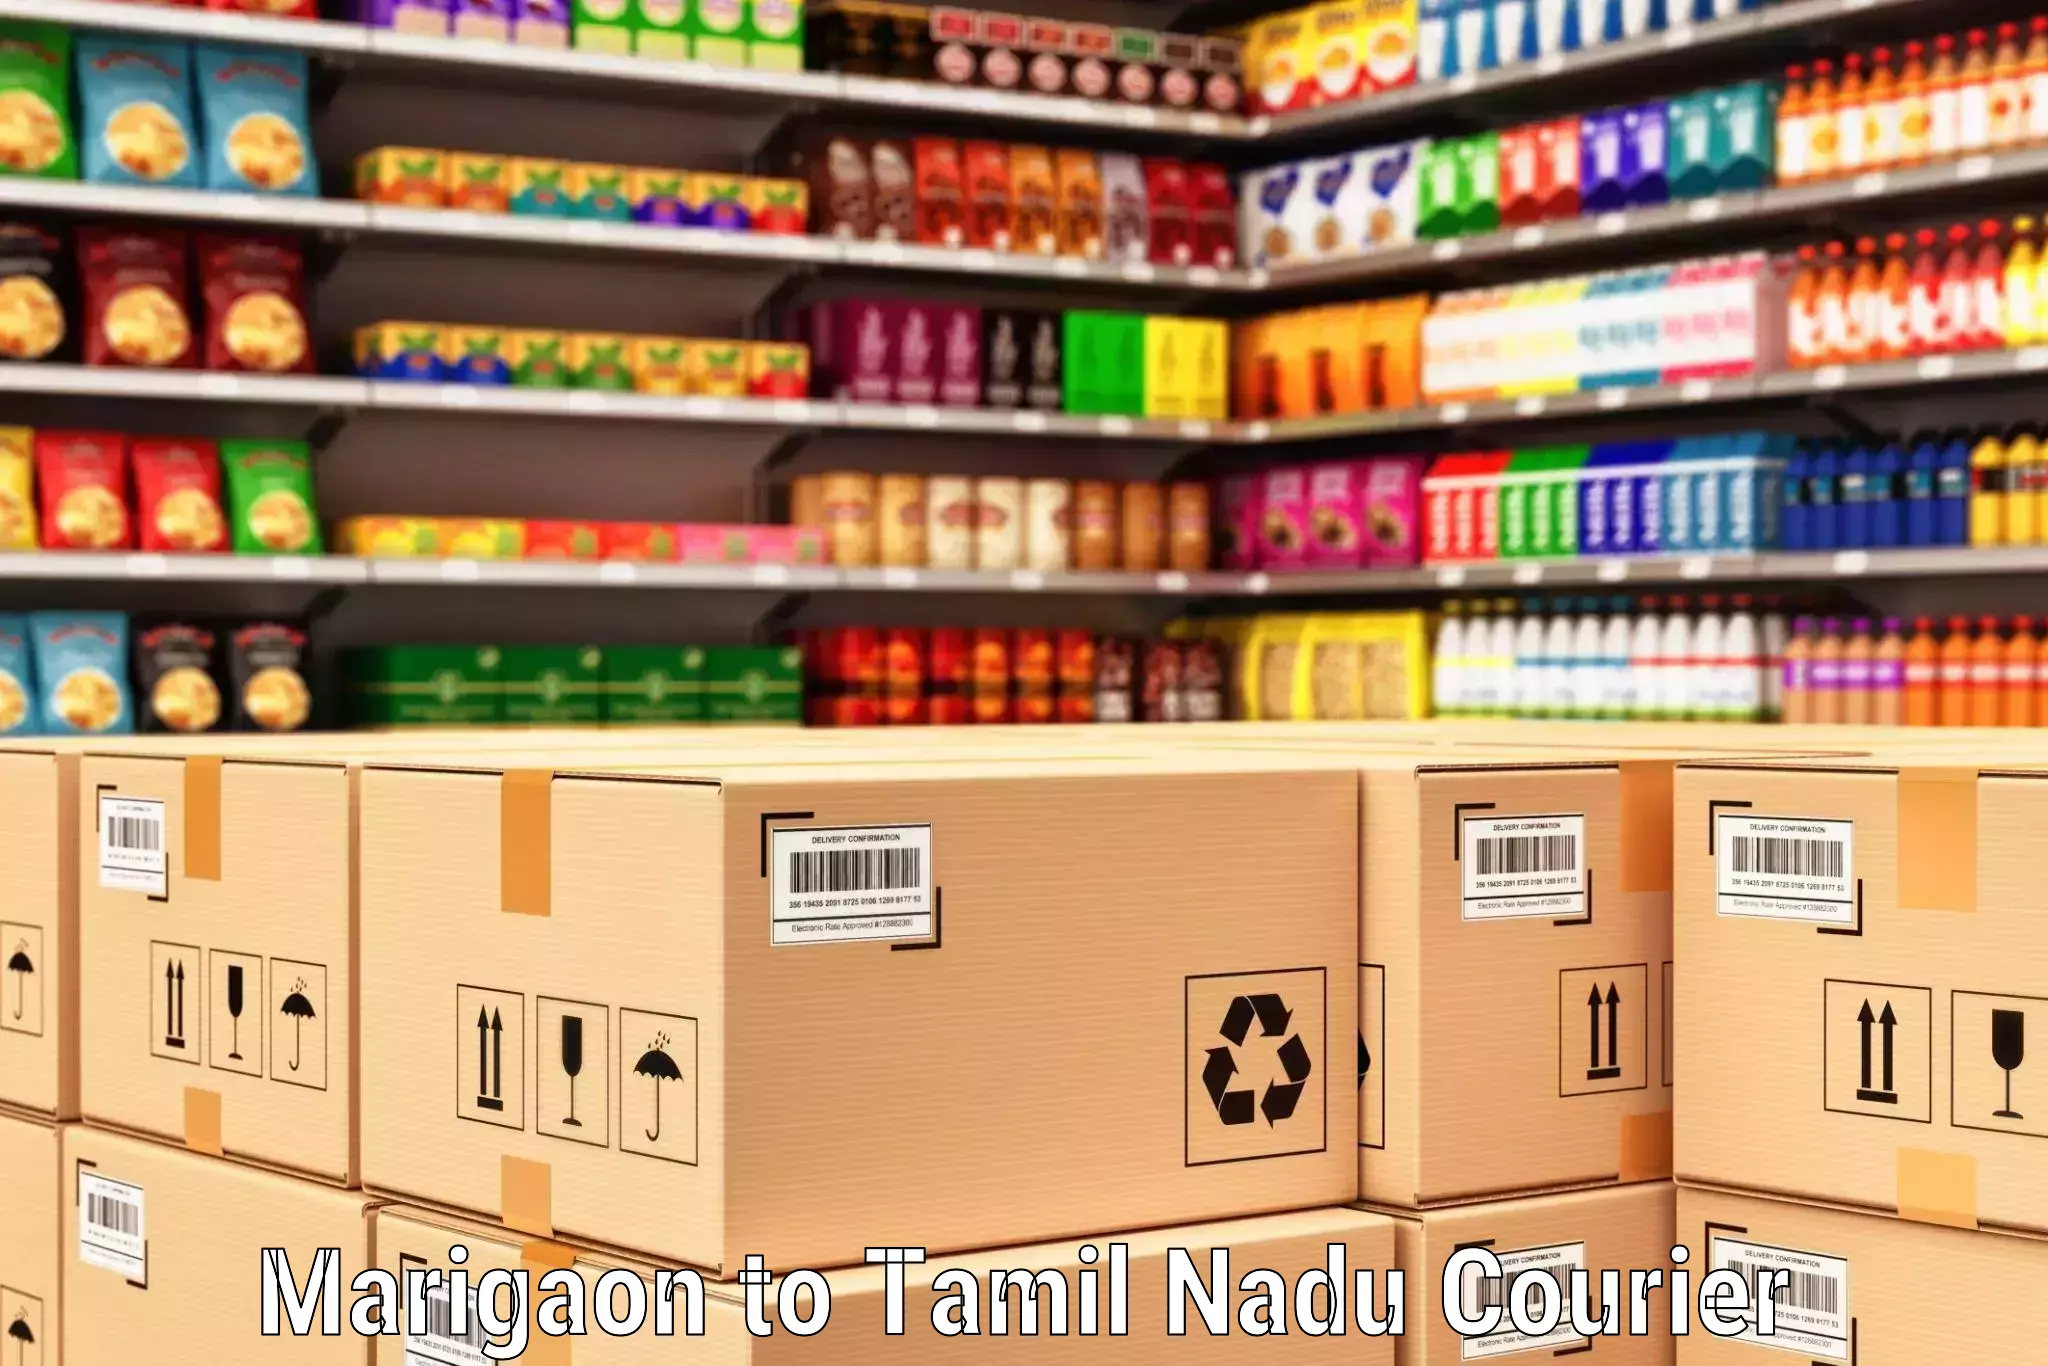 Pharmaceutical courier Marigaon to Tamil Nadu